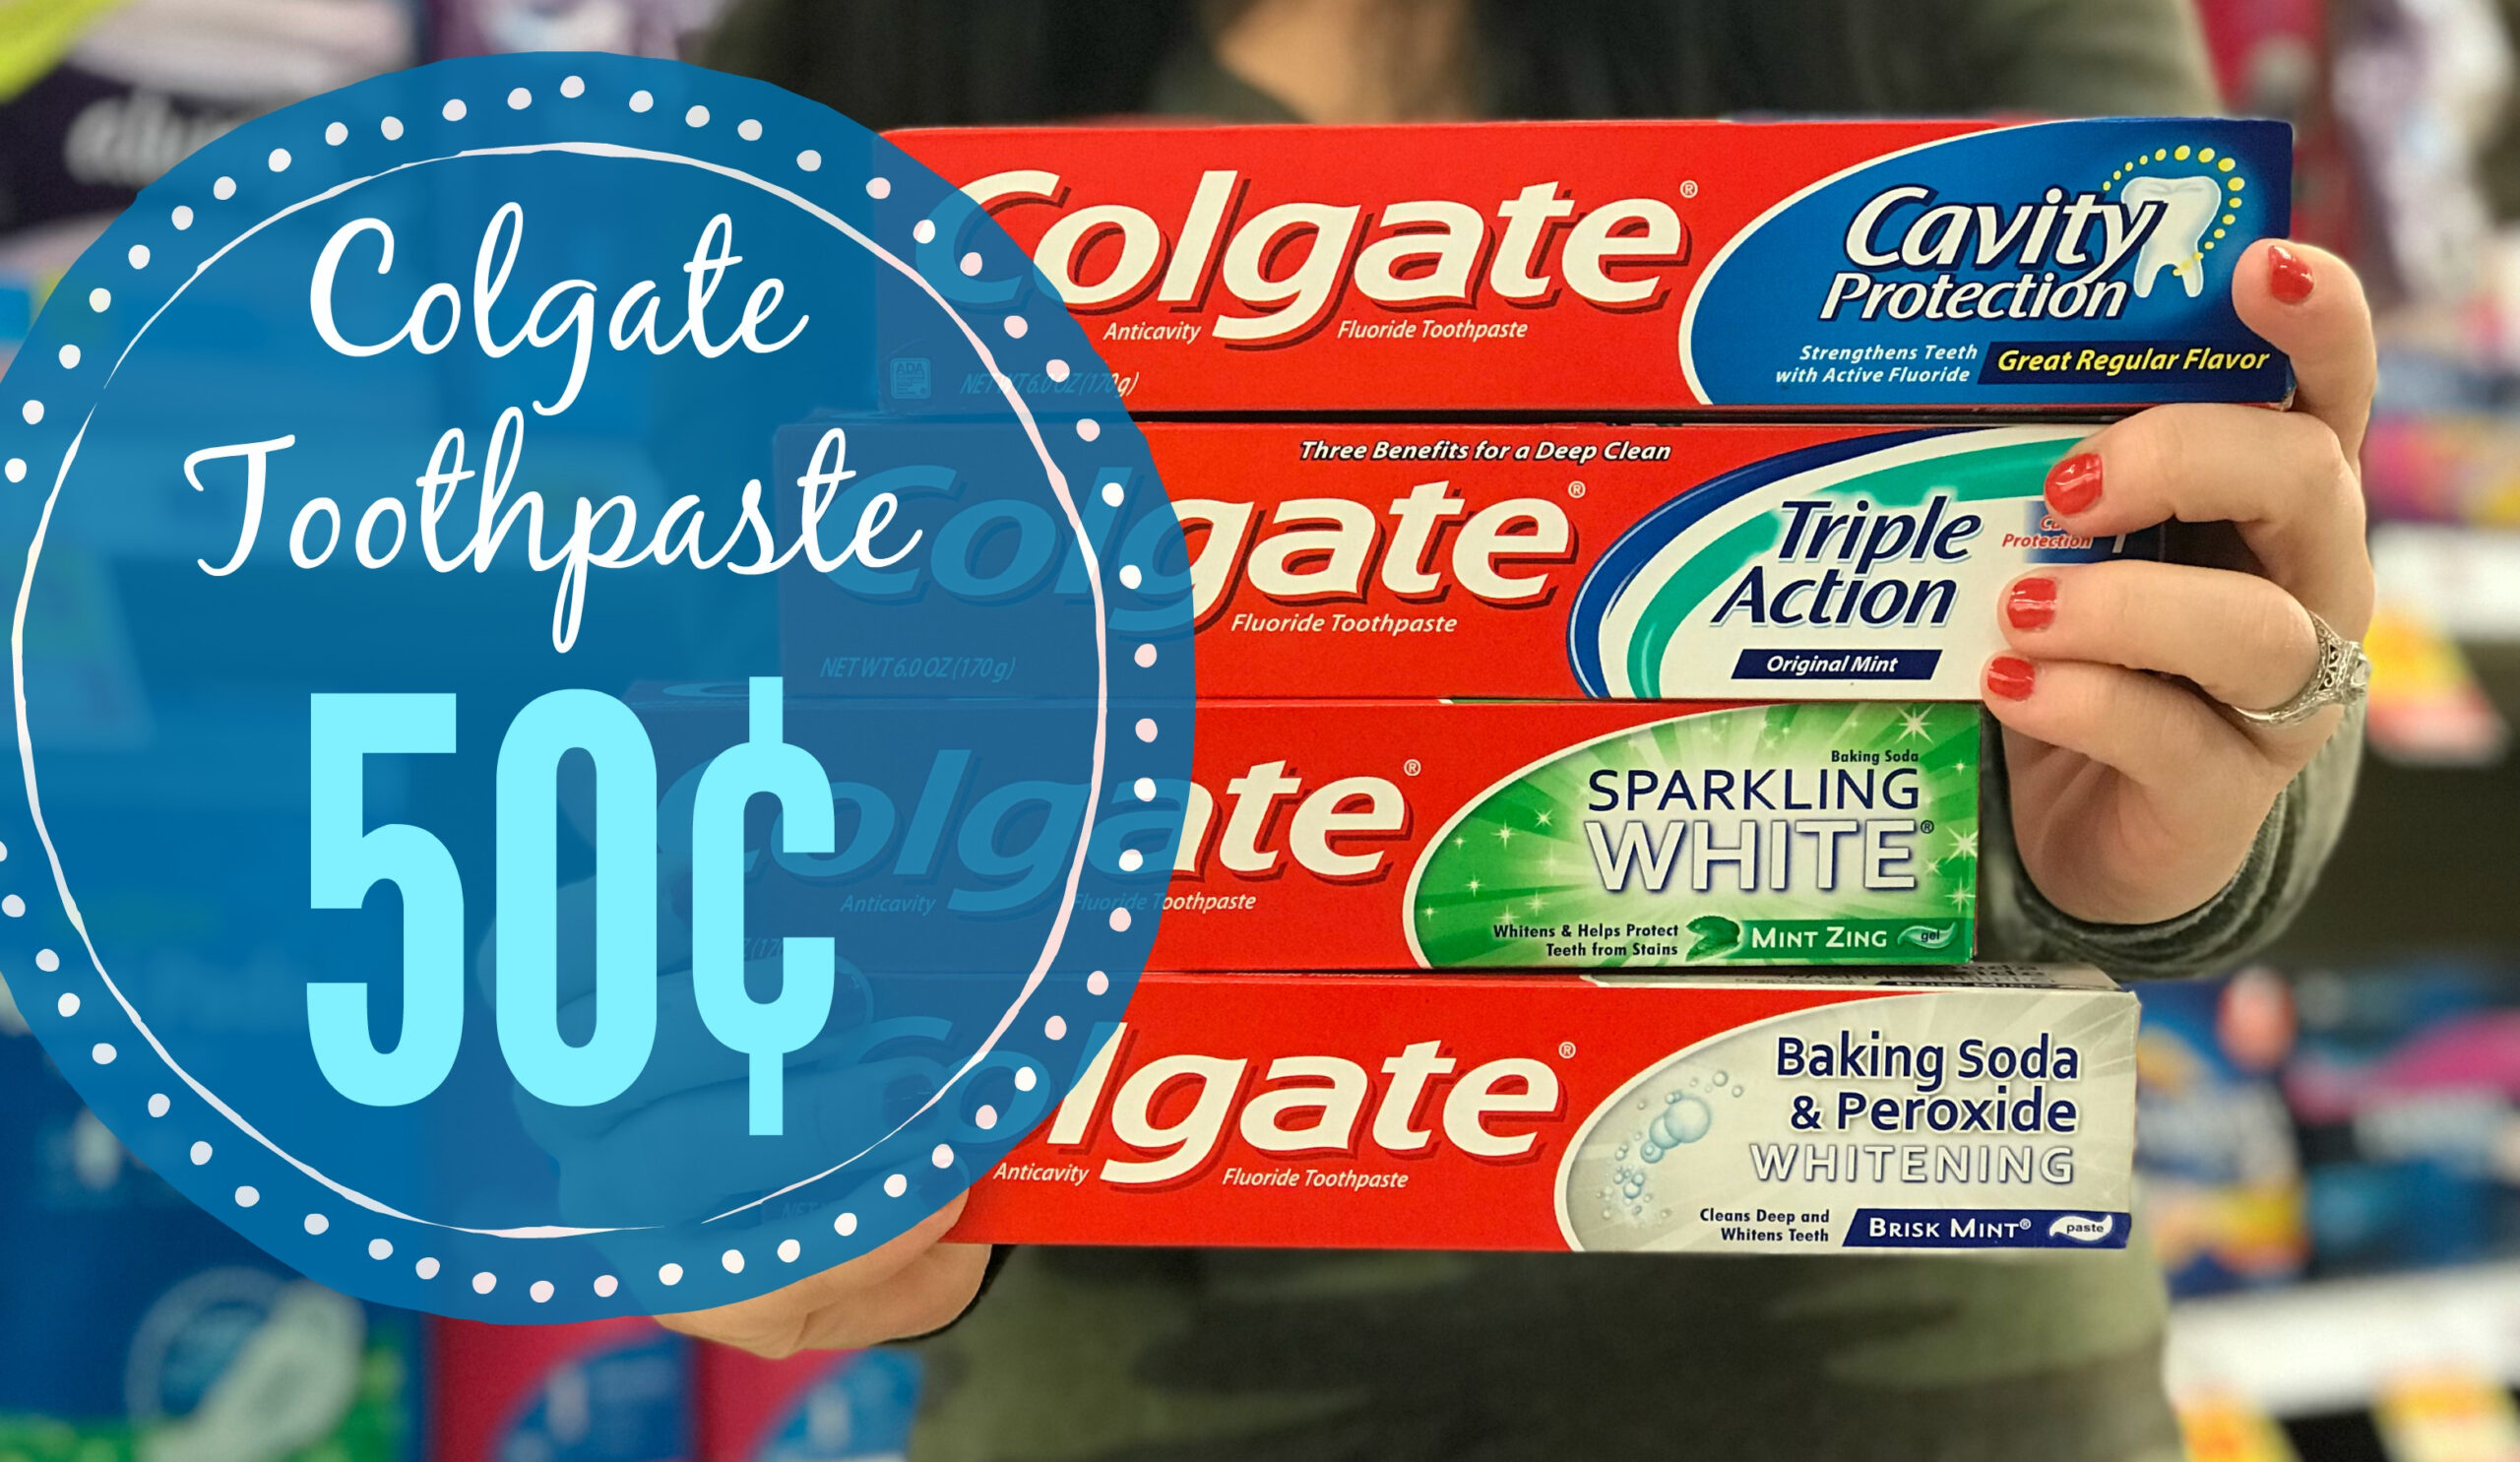 Colgate Toothpaste Just $0.50 At Kroger!! (Reg Price $1.69 - Free Printable Toothpaste Coupons